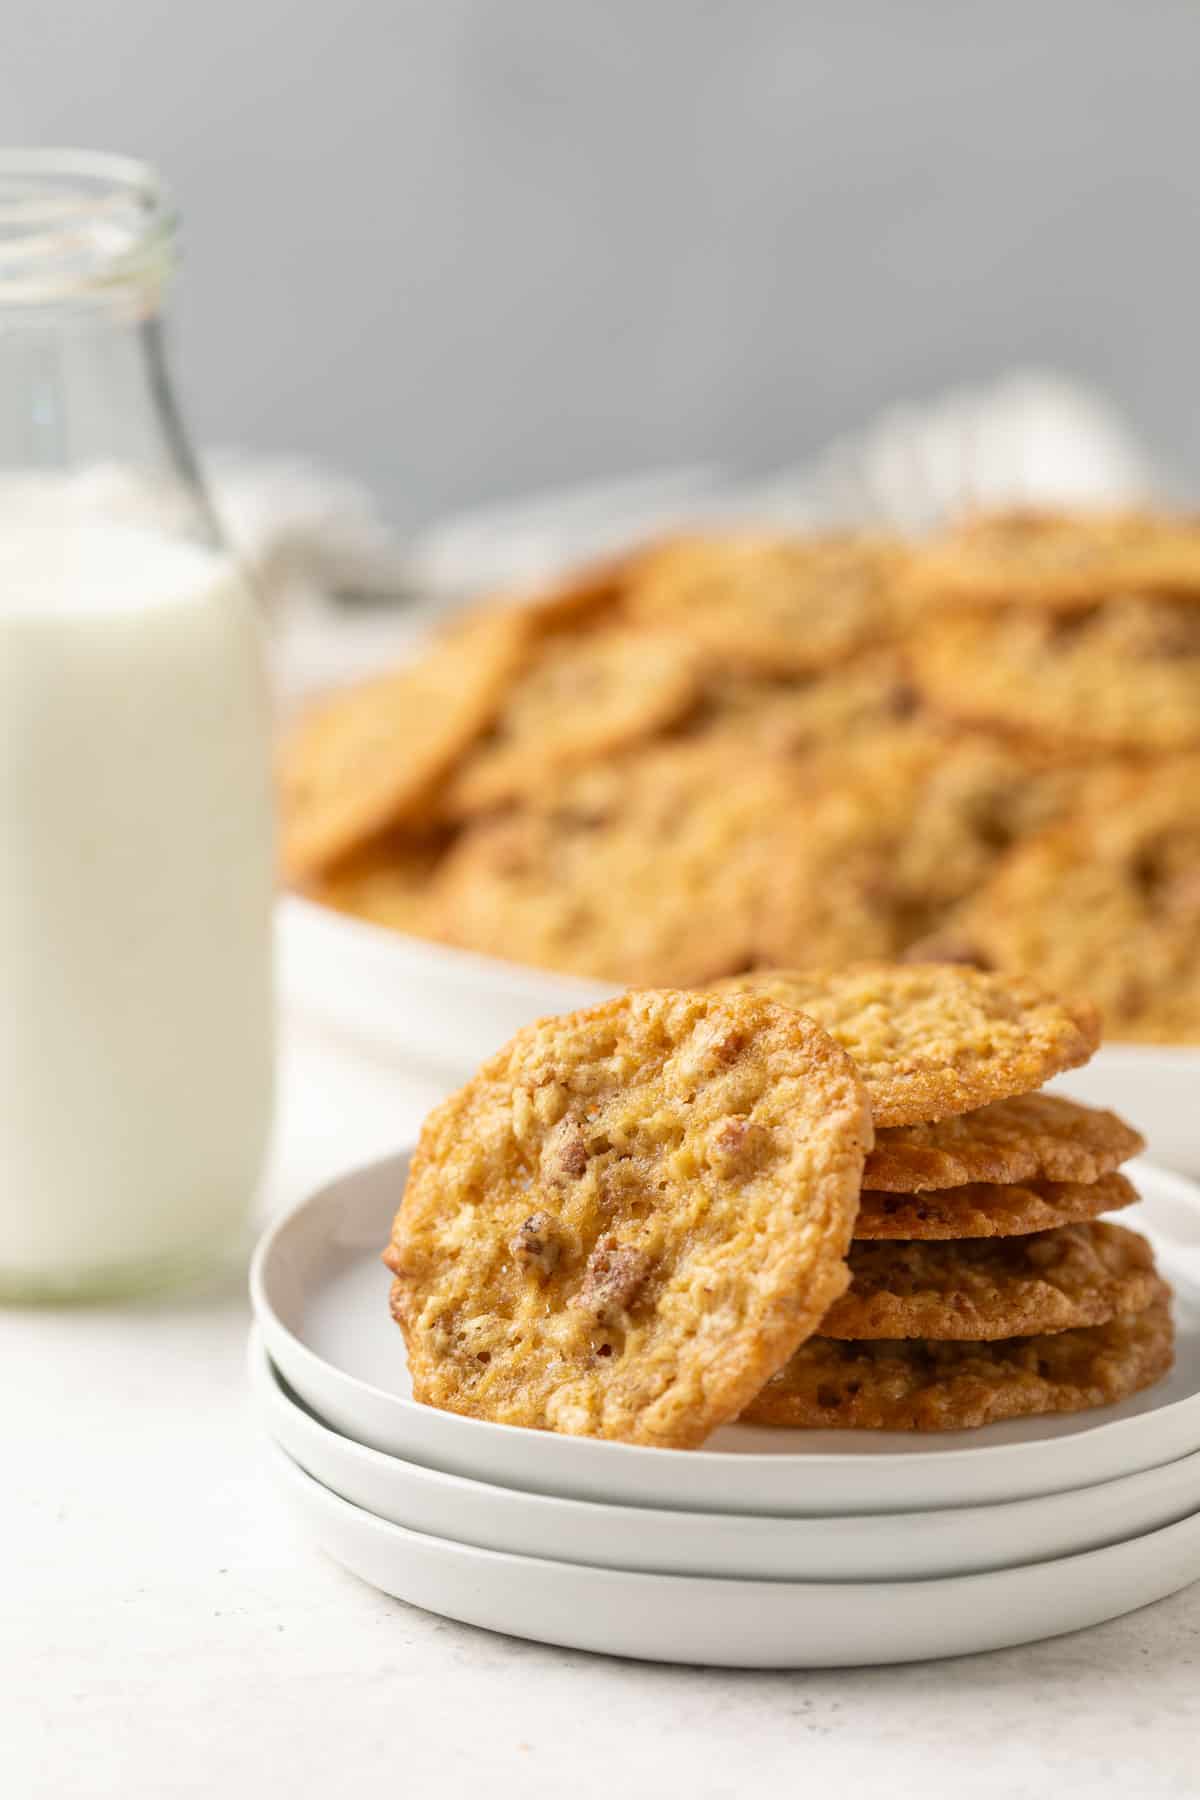 Front view of oatmeal lace cookies on a small white plate. A glass of milk is in the background.